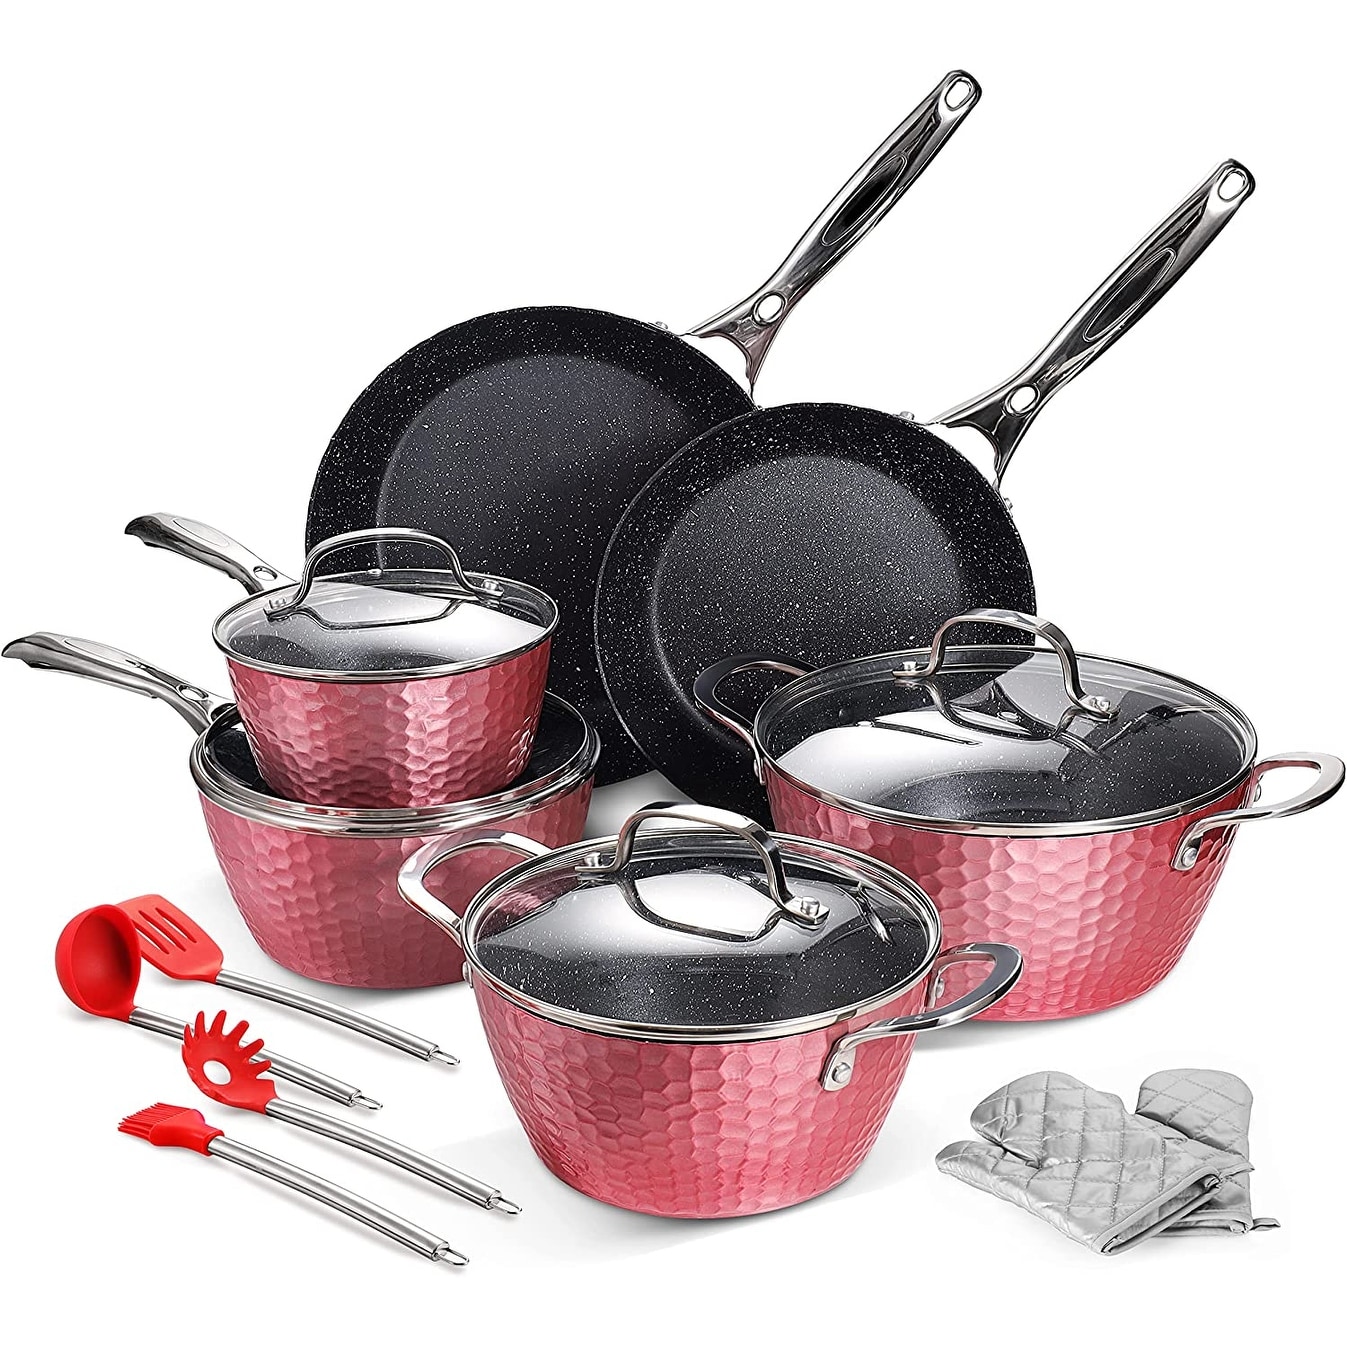 https://ak1.ostkcdn.com/images/products/is/images/direct/f5d3f2f39e3c9f31a3ada405ed8d10a2f00b494e/Cookware-16-Piece-Home-Kitchen-Ware-Pots-Pan-Set-with-Non-stick-Coating.jpg